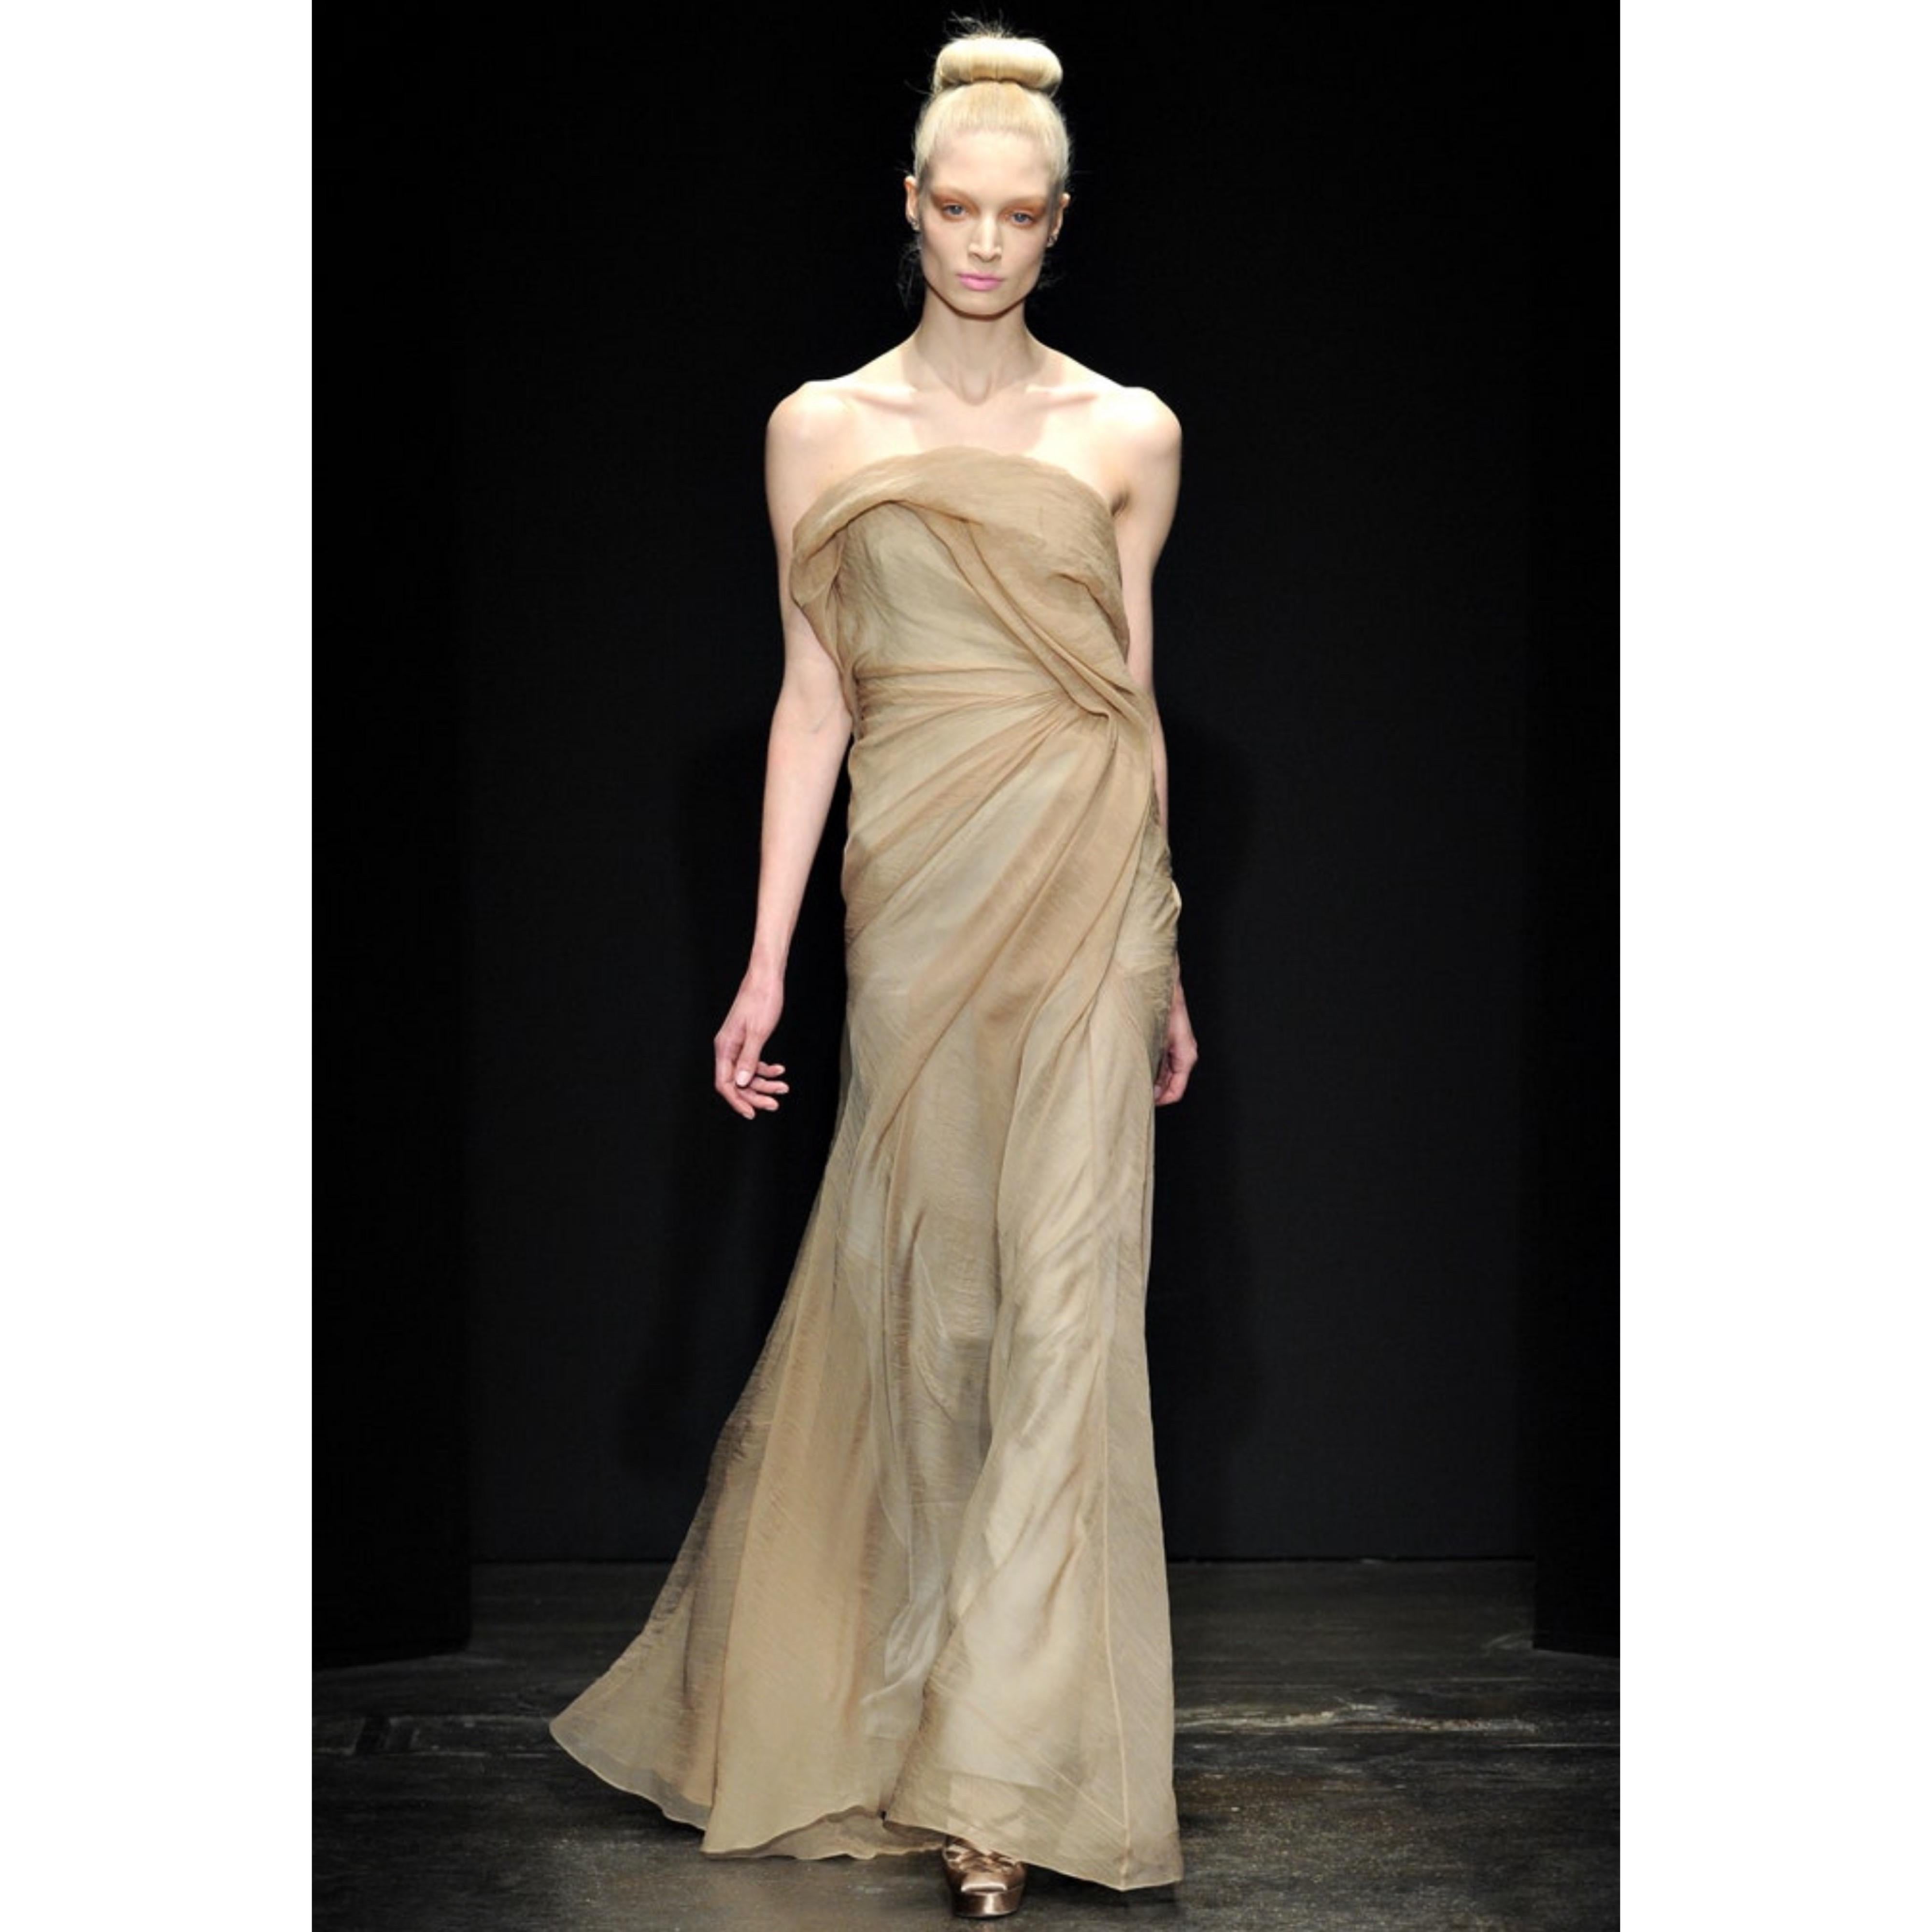 Stunning DONNA KARAN Fall 2011 Runway silk organza strapless gown ! Features the most beautiful nude silk organza, with just the slightest amount of gold sheen. Boned bodice holds everything in place. Hidden zipper up the back with hook-and-eye